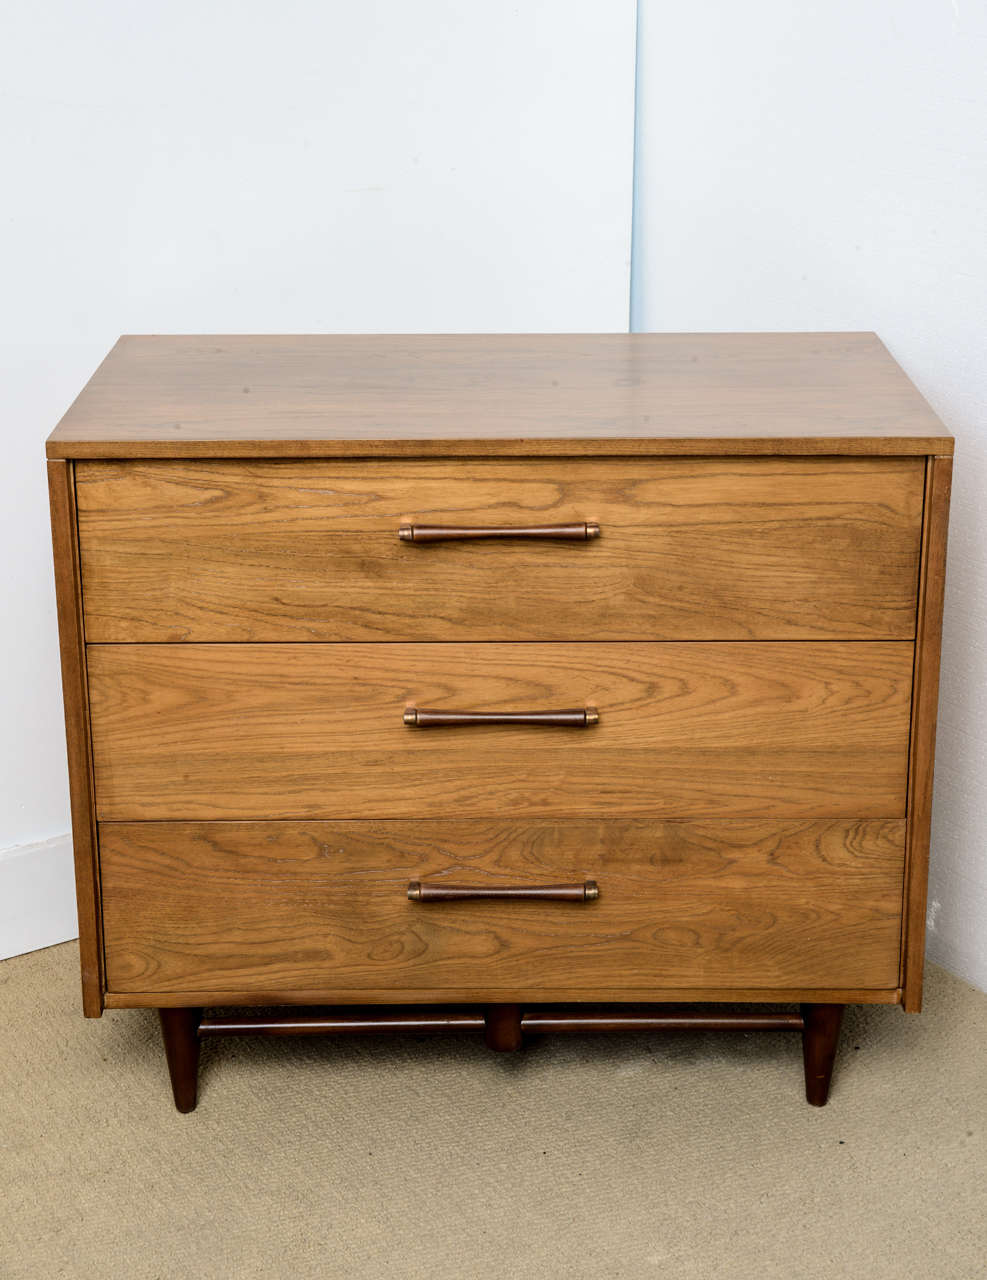 Great pair of commodes dating from the 1950's. These are constructed of solid ashwood . They have been re-furbished back to their original condition. Great pieces to be used as dressers or large nightstands.